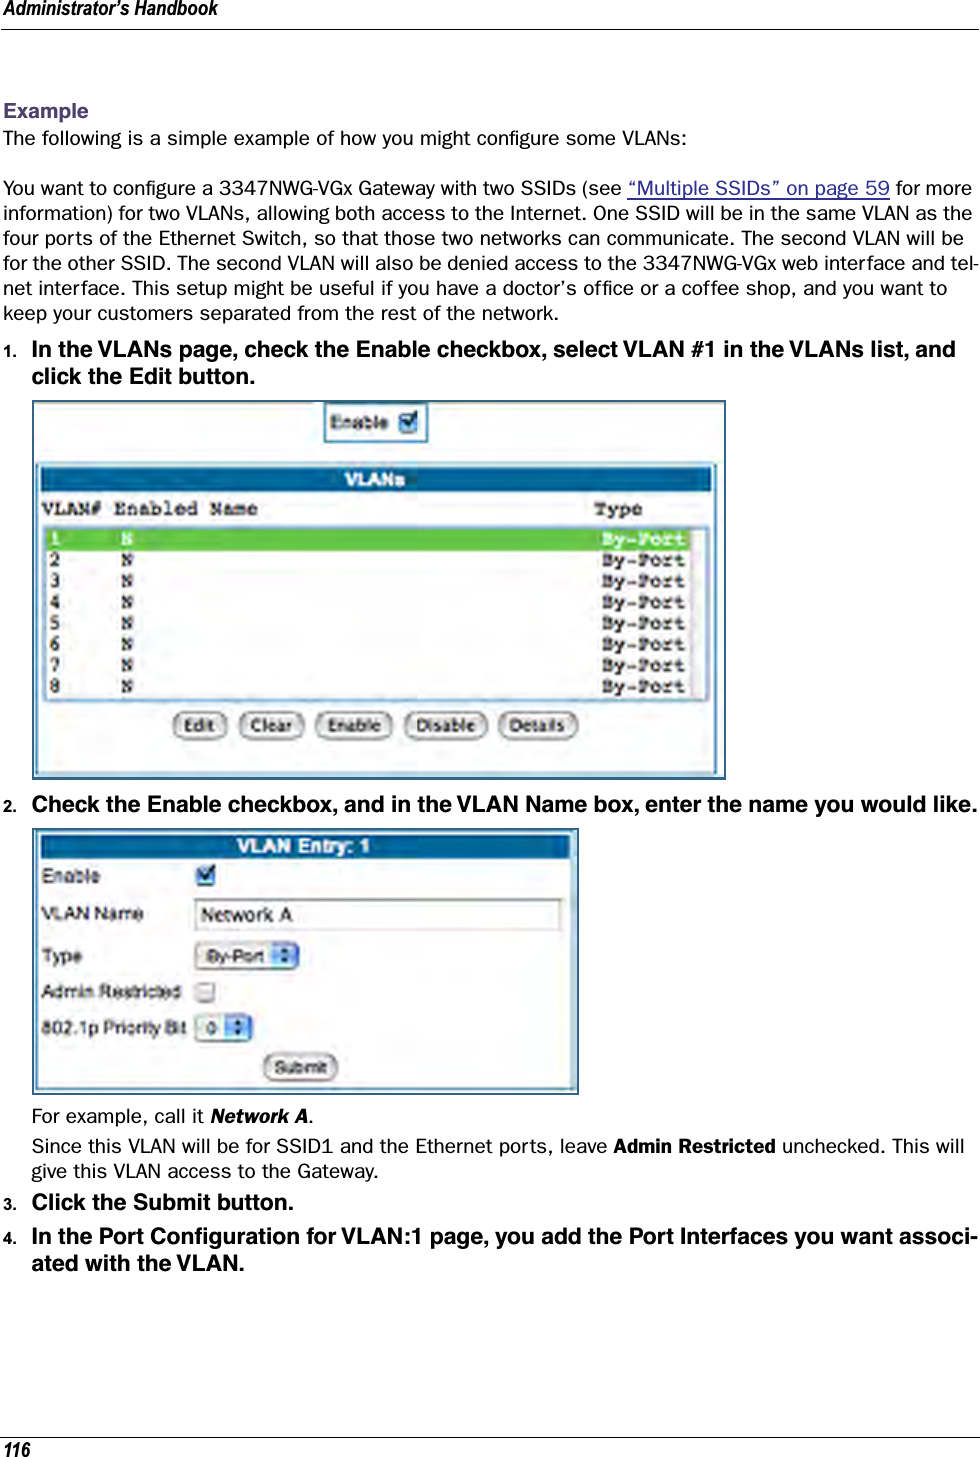 Administrator’s Handbook116ExampleThe following is a simple example of how you might conﬁgure some VLANs:You want to conﬁgure a 3347NWG-VGx Gateway with two SSIDs (see “Multiple SSIDs” on page 59 for more information) for two VLANs, allowing both access to the Internet. One SSID will be in the same VLAN as the four ports of the Ethernet Switch, so that those two networks can communicate. The second VLAN will be for the other SSID. The second VLAN will also be denied access to the 3347NWG-VGx web interface and tel-net interface. This setup might be useful if you have a doctor’s ofﬁce or a coffee shop, and you want to keep your customers separated from the rest of the network.1. In the VLANs page, check the Enable checkbox, select VLAN #1 in the VLANs list, and click the Edit button.2. Check the Enable checkbox, and in the VLAN Name box, enter the name you would like.For example, call it Network A.Since this VLAN will be for SSID1 and the Ethernet ports, leave Admin Restricted unchecked. This will give this VLAN access to the Gateway.3. Click the Submit button.4. In the Port Conﬁguration for VLAN:1 page, you add the Port Interfaces you want associ-ated with the VLAN.